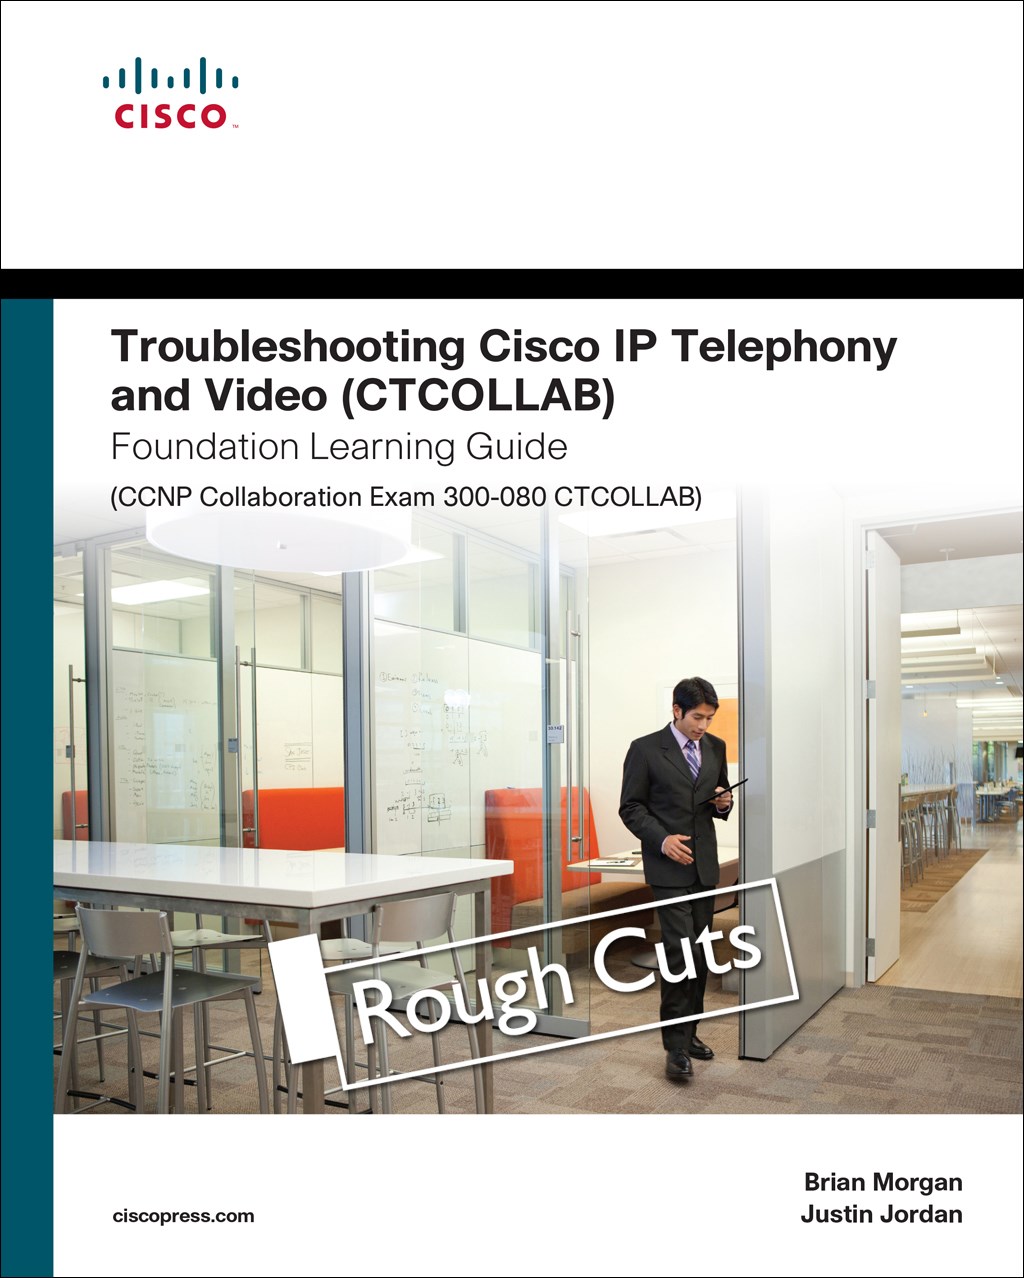 Troubleshooting Cisco IP Telephony and Video (CTCOLLAB) Foundation Learning Guide (CCNP Collaboration Exam 300-080 CTCOLLAB), Rough Cuts